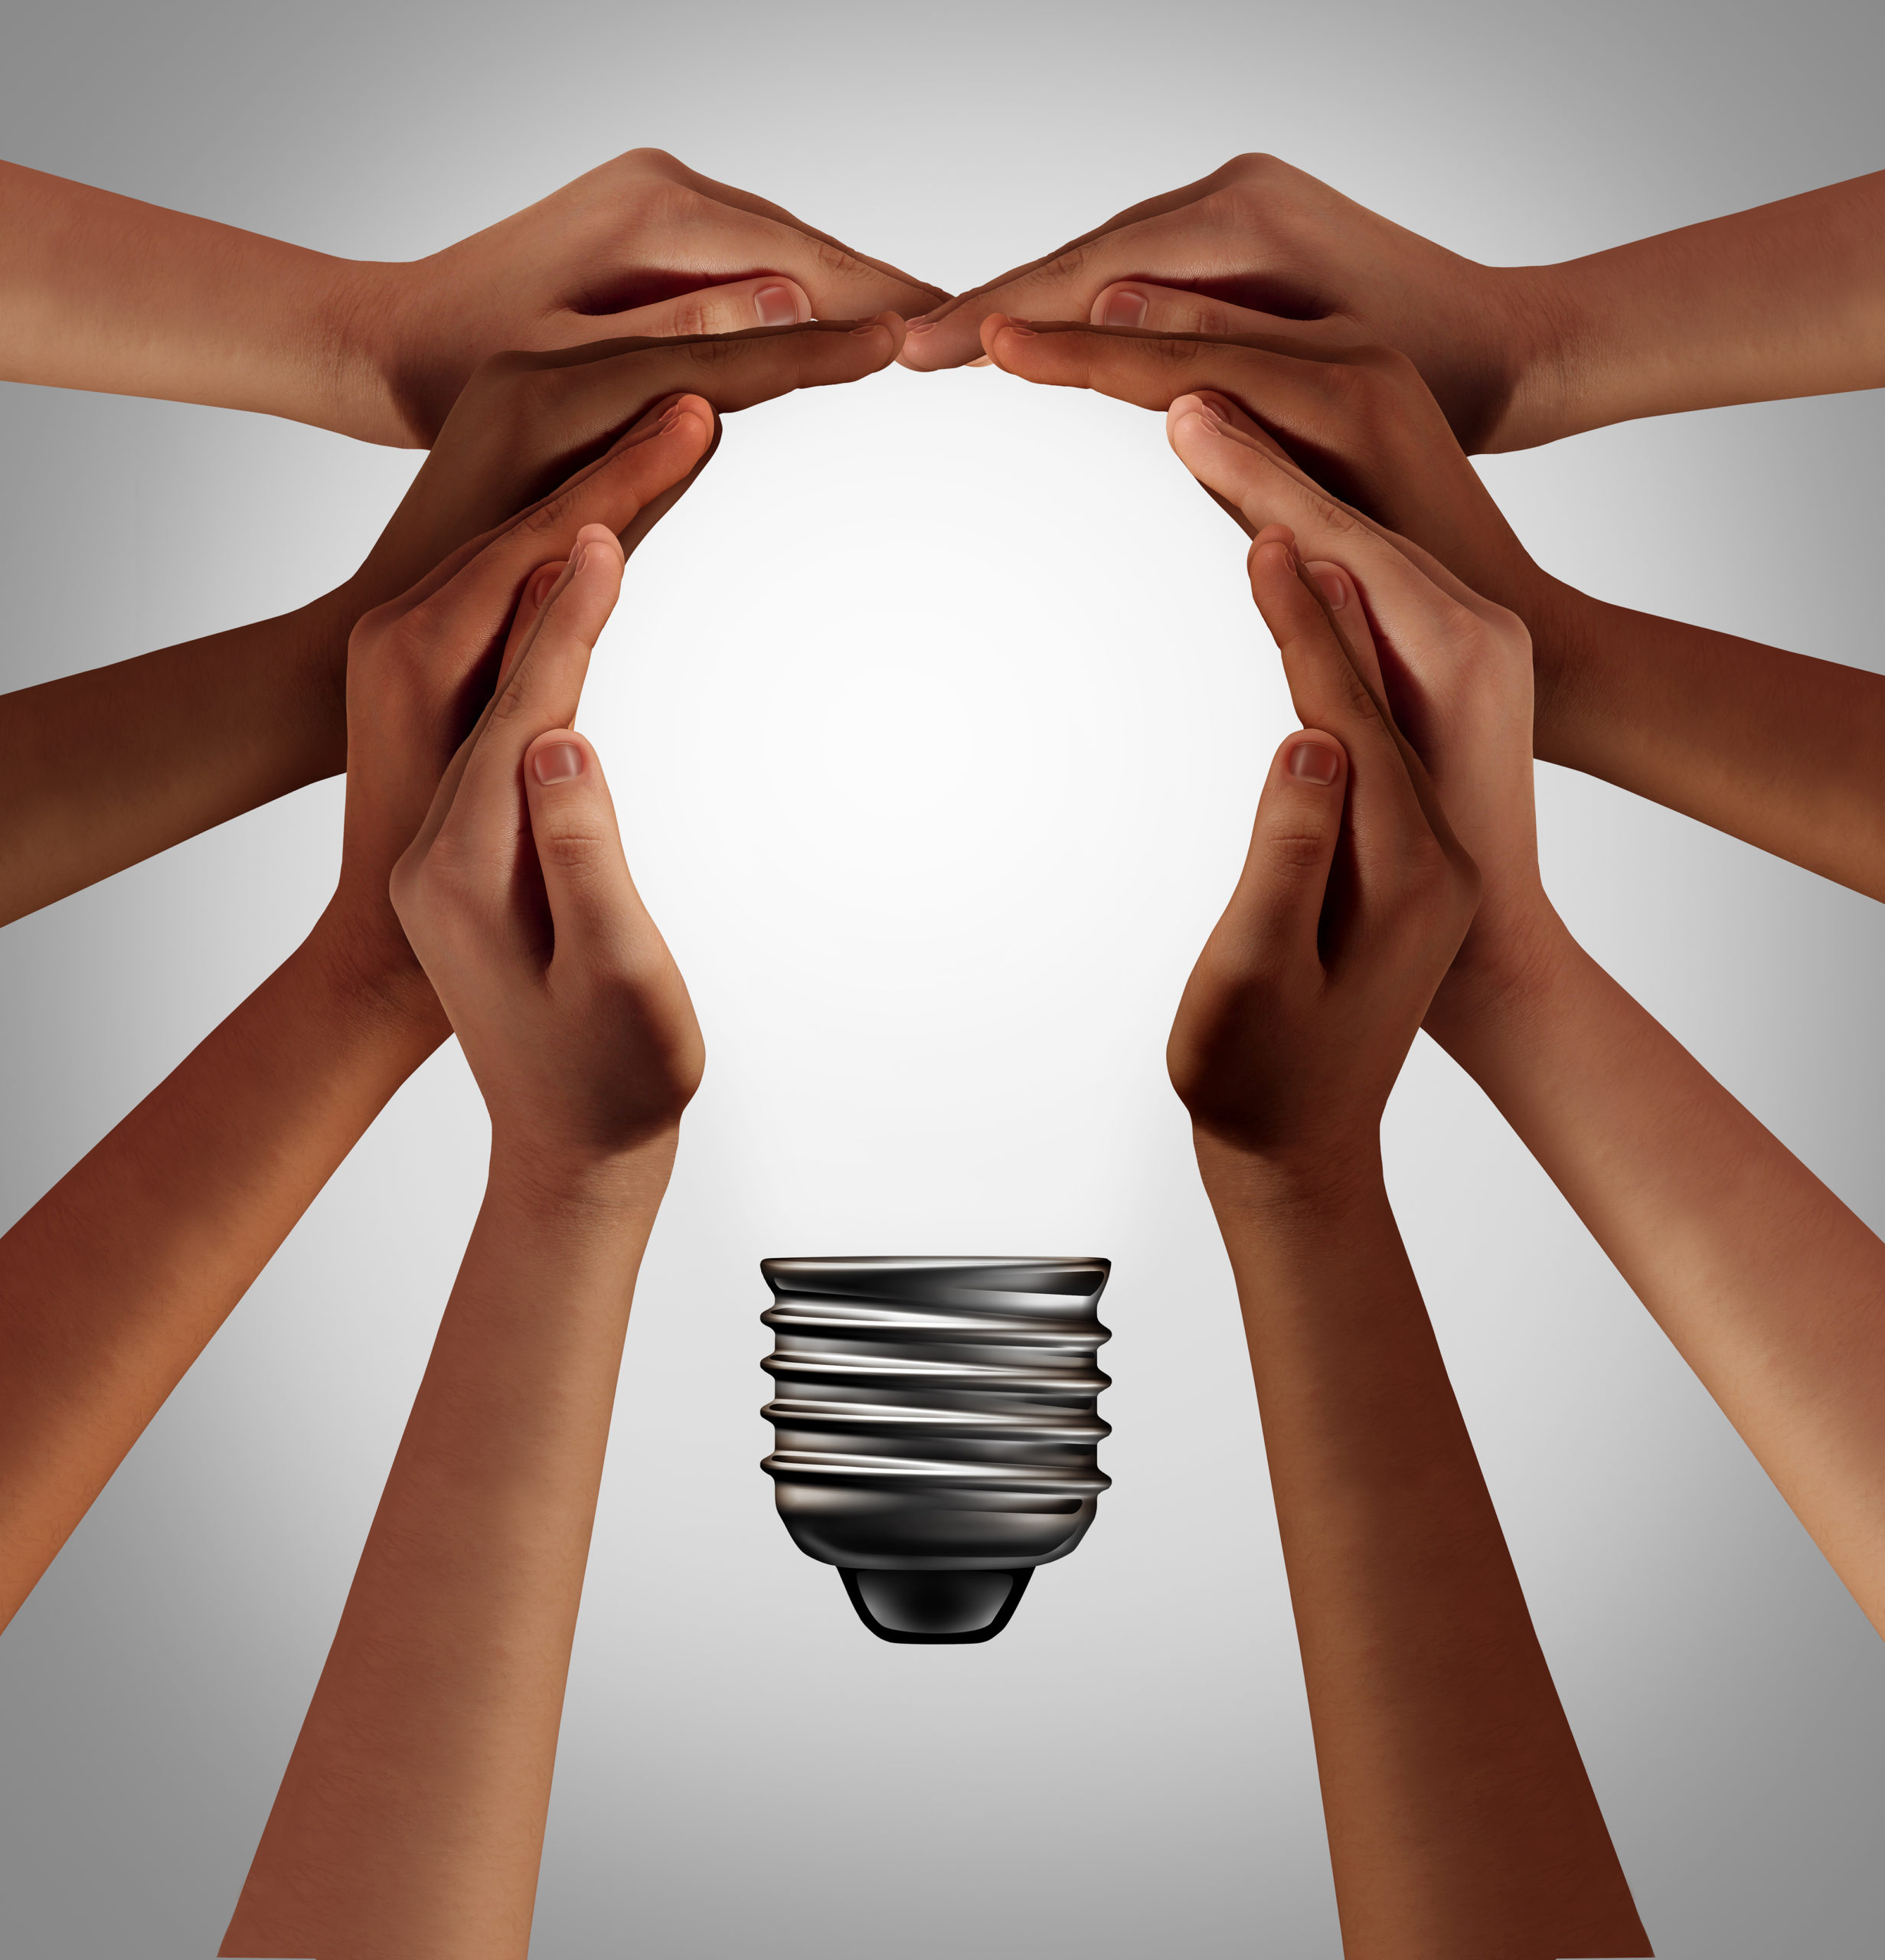 Hands coming together to form the shape of a light bulb.